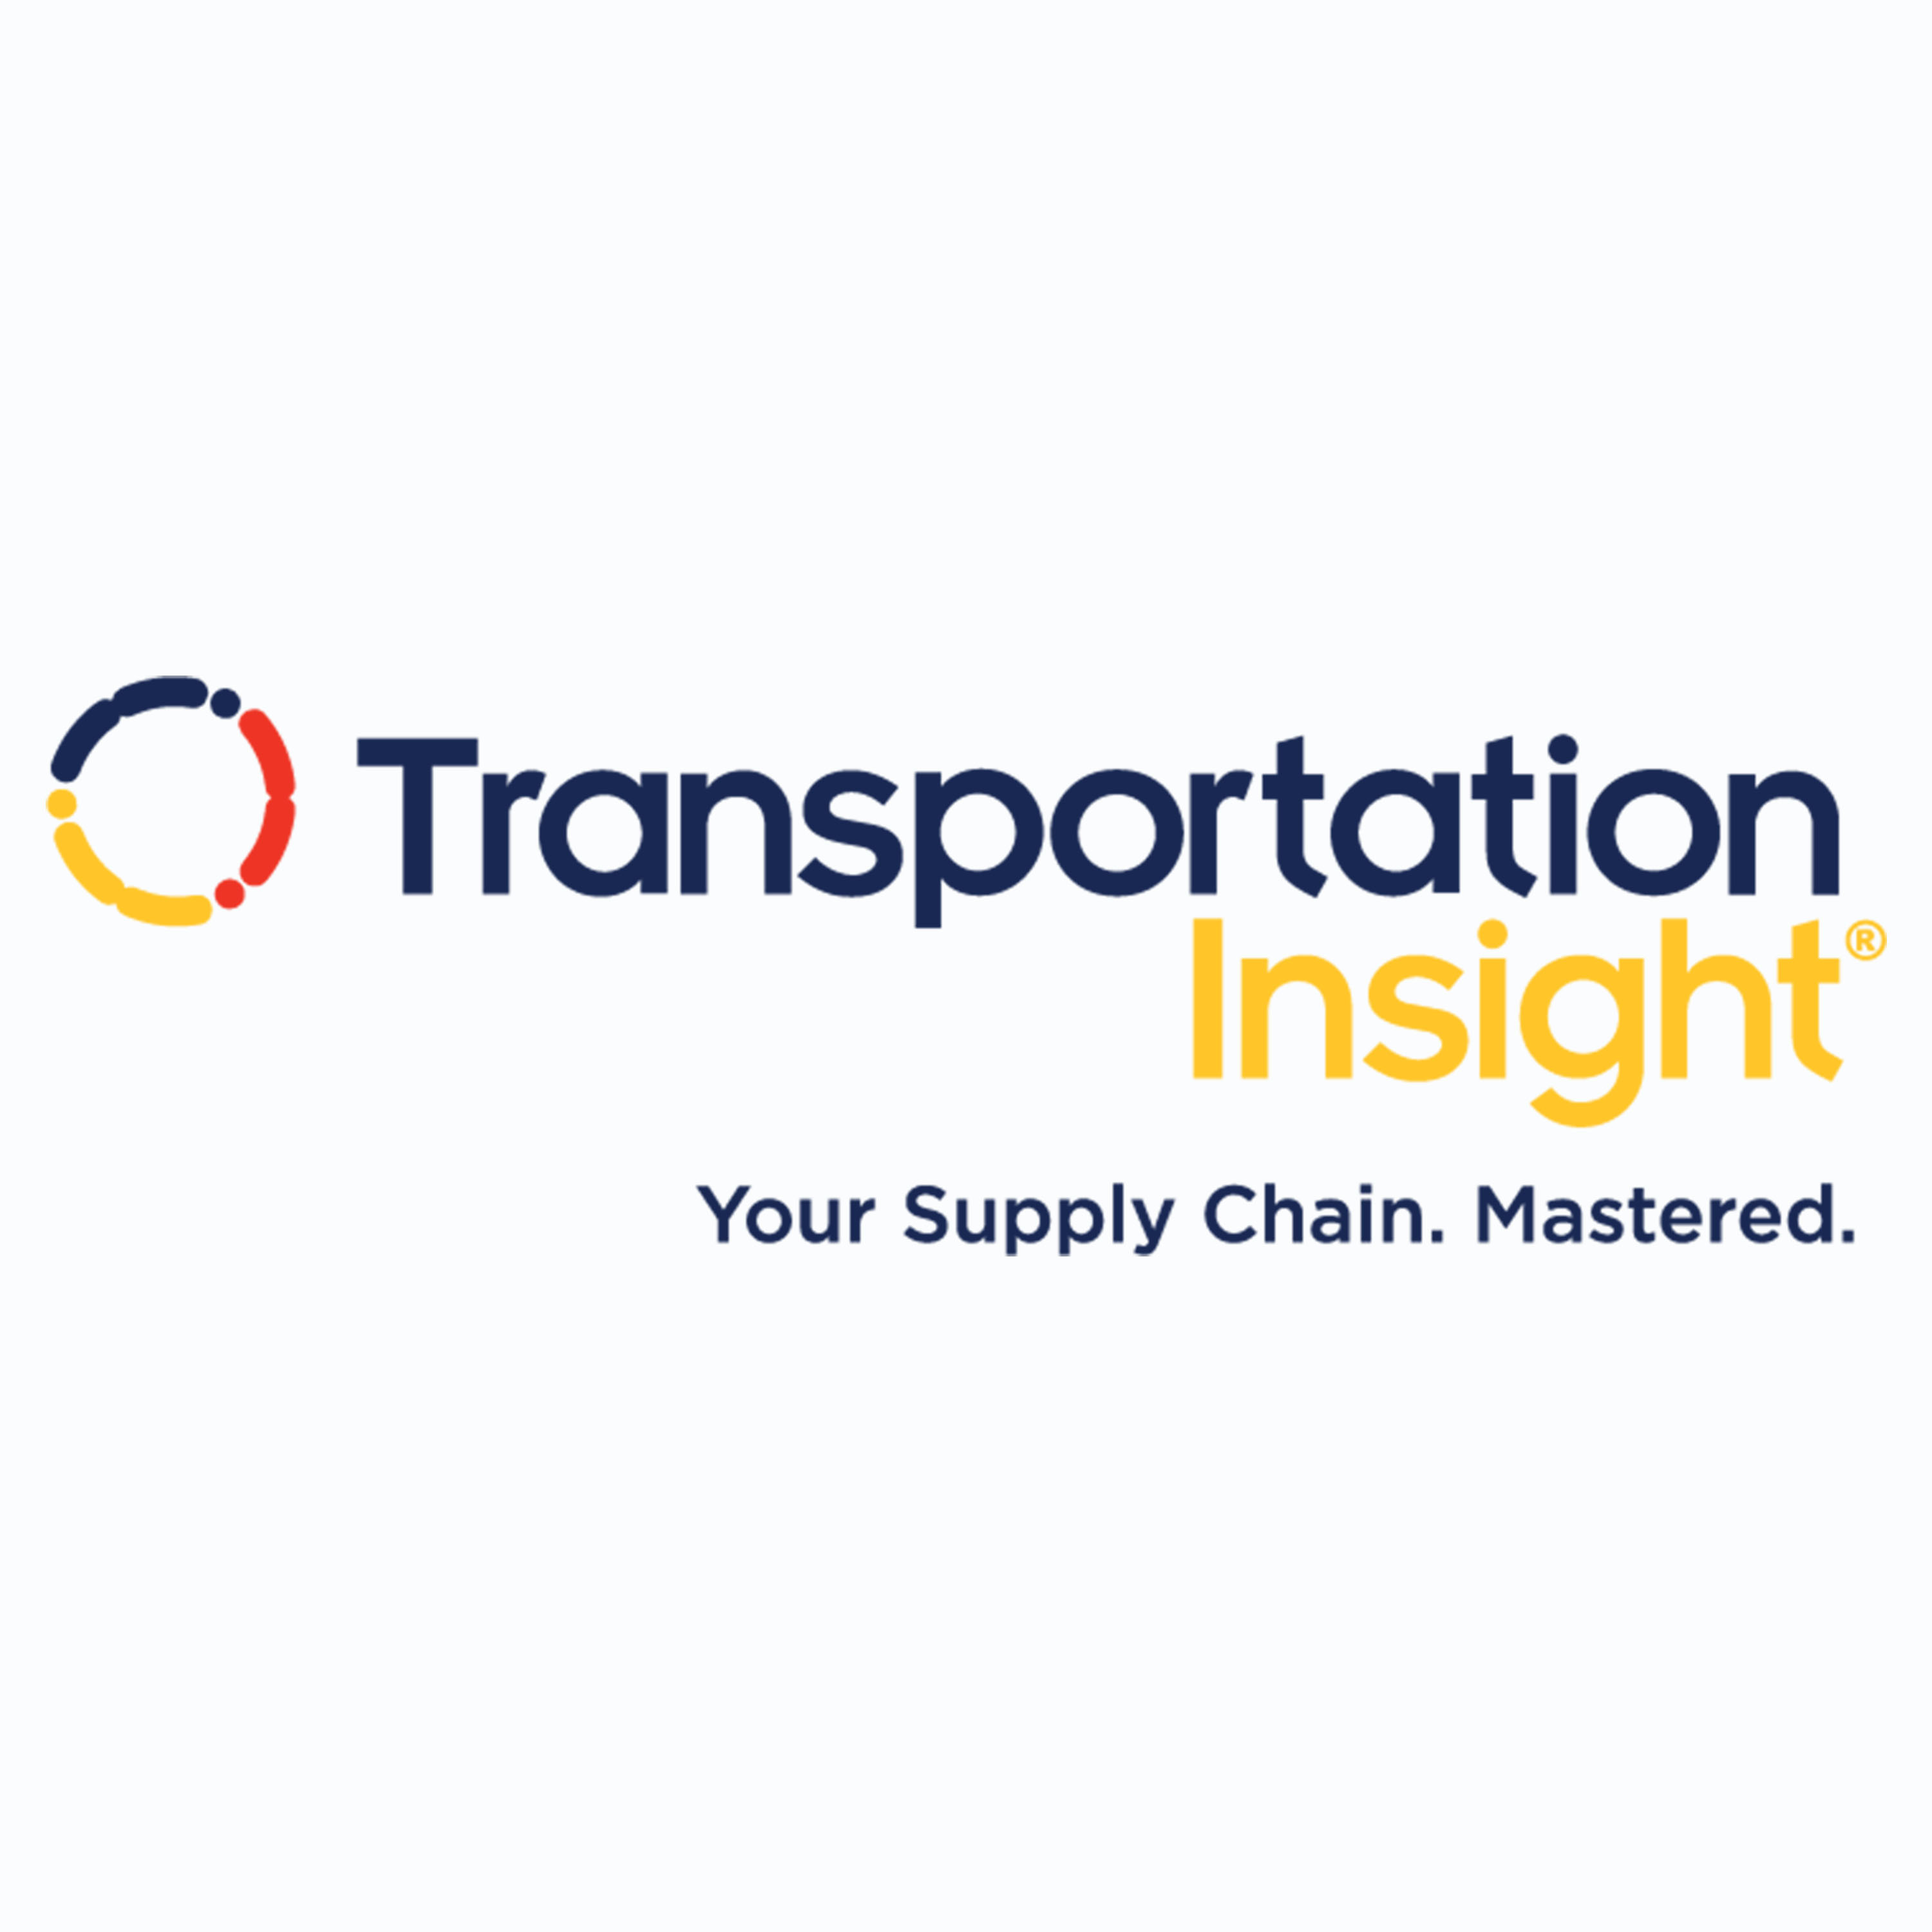 The Supply Chain Masters